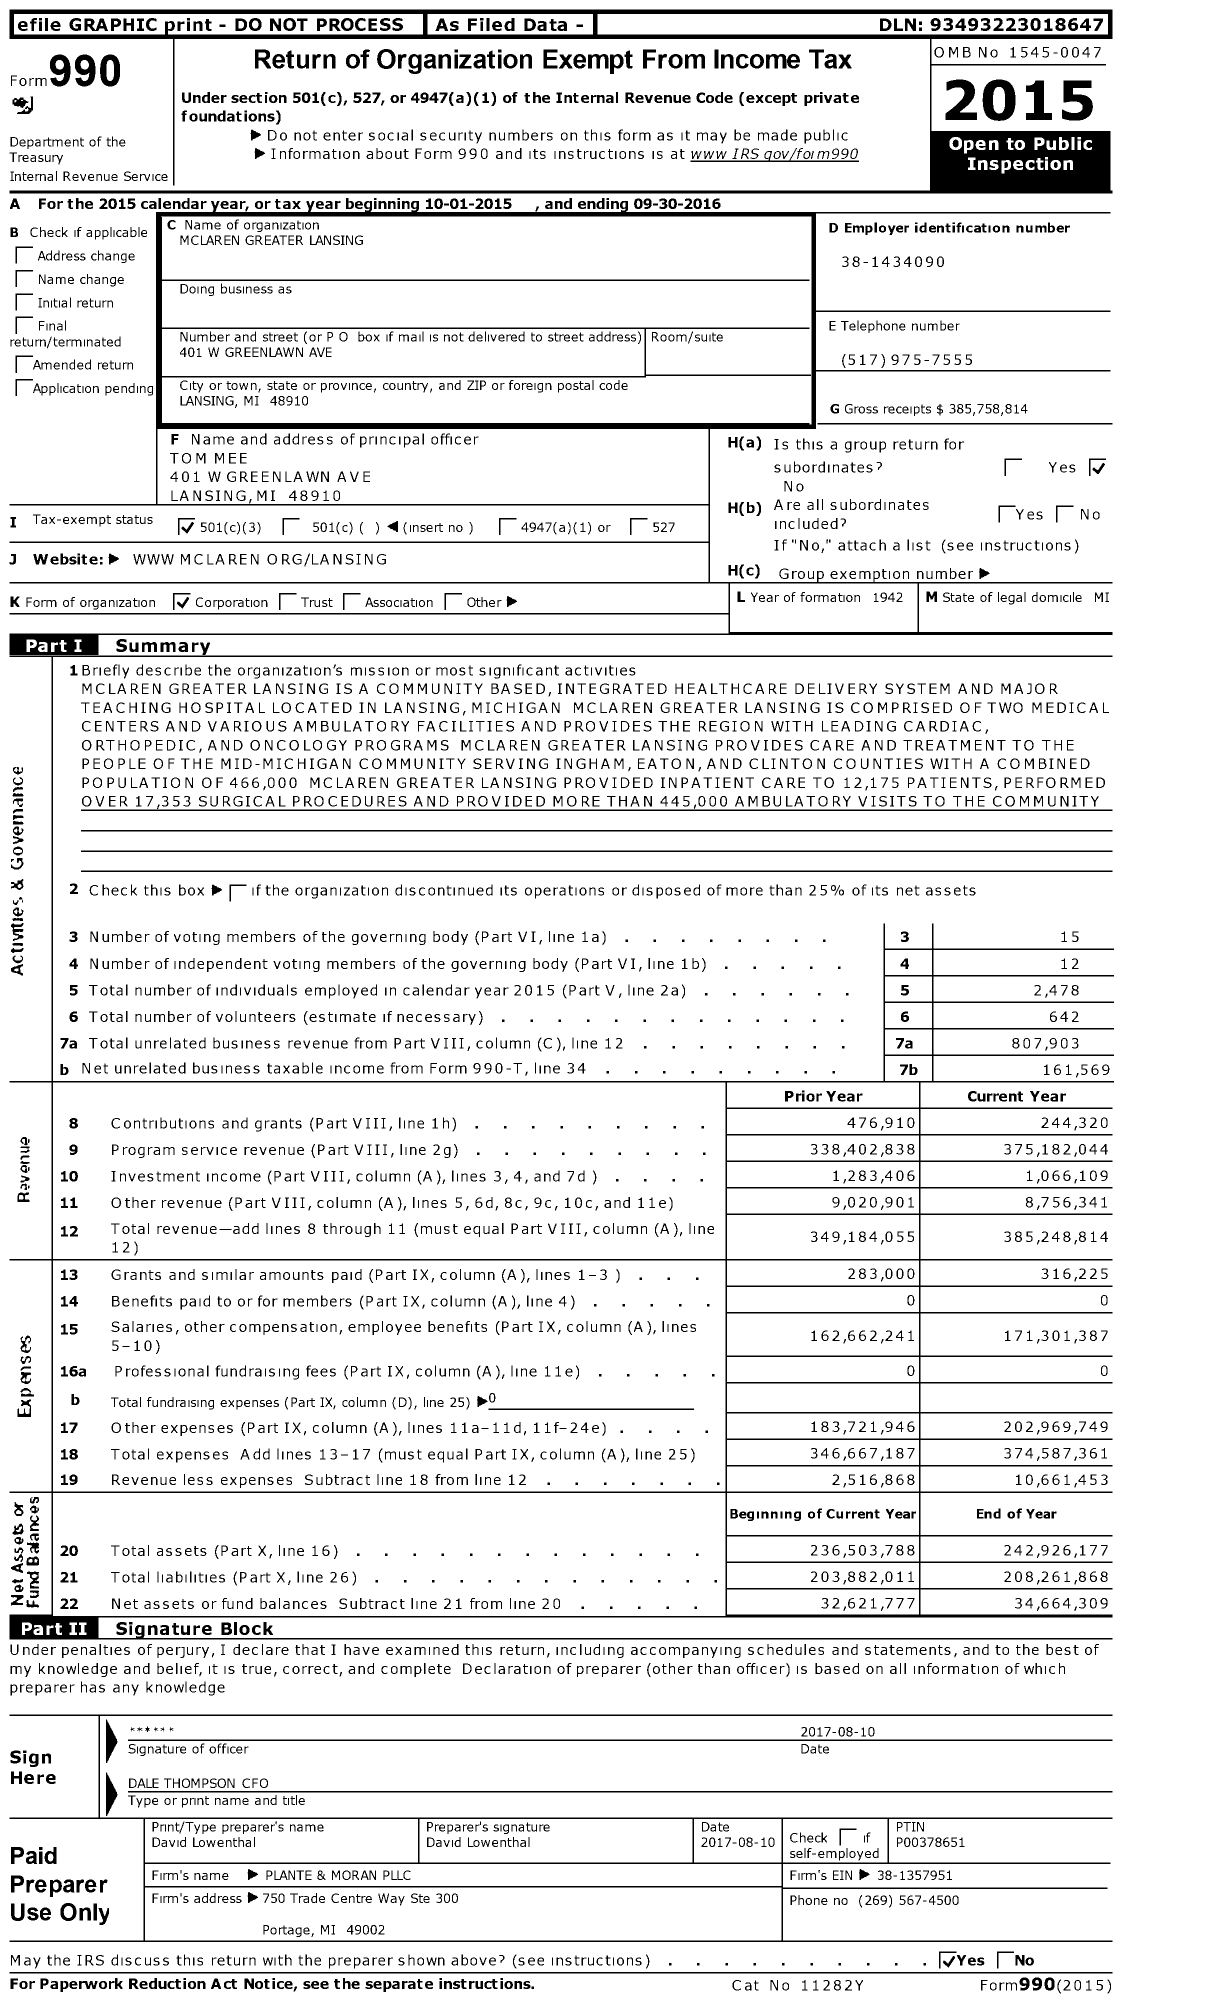 Image of first page of 2015 Form 990 for Mclaren Greater Lansing (MGL)